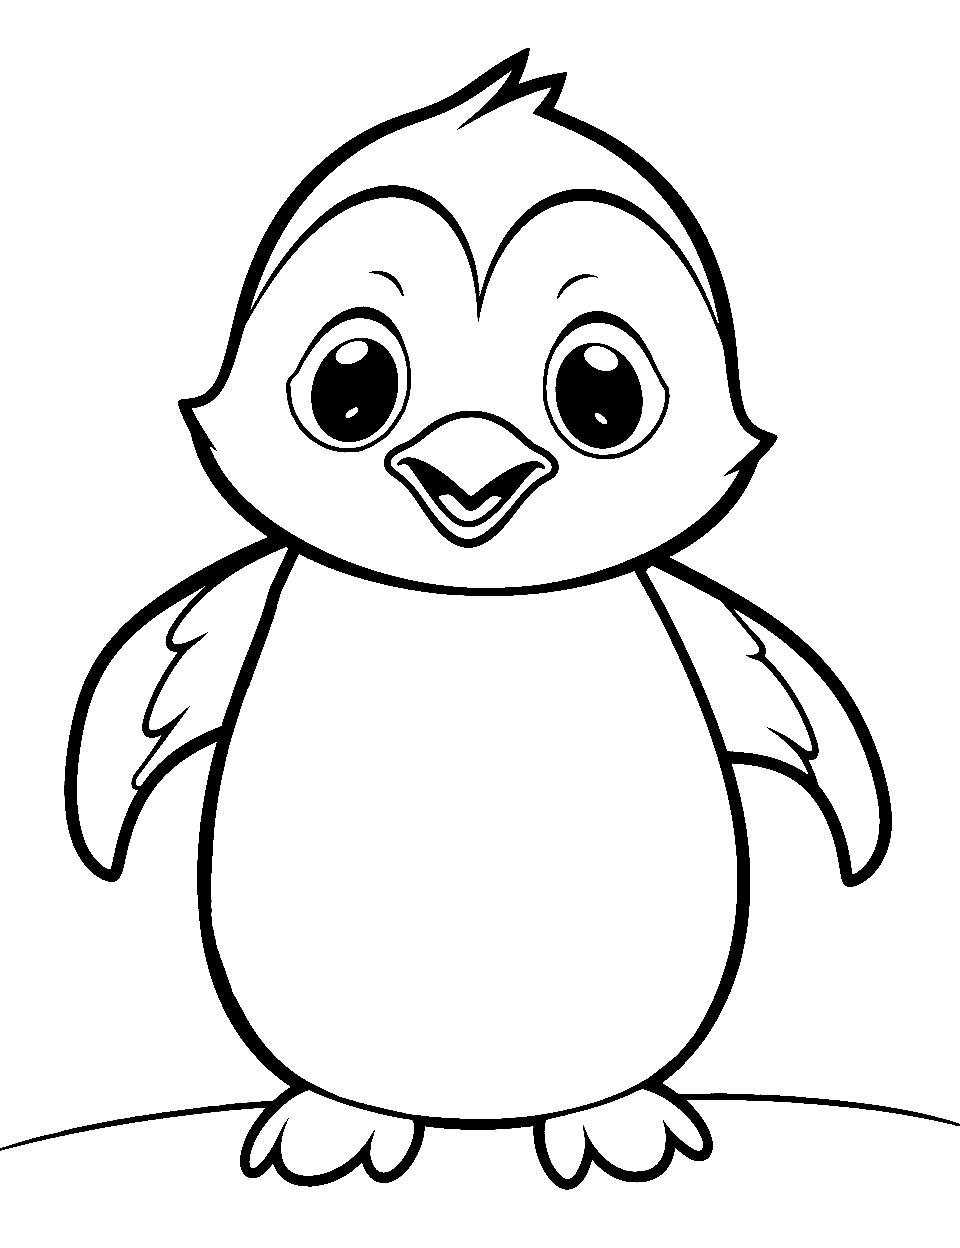 Kawaii Penguin Delight Coloring Page - An adorable kawaii penguin with exaggerated cute features and a smile.